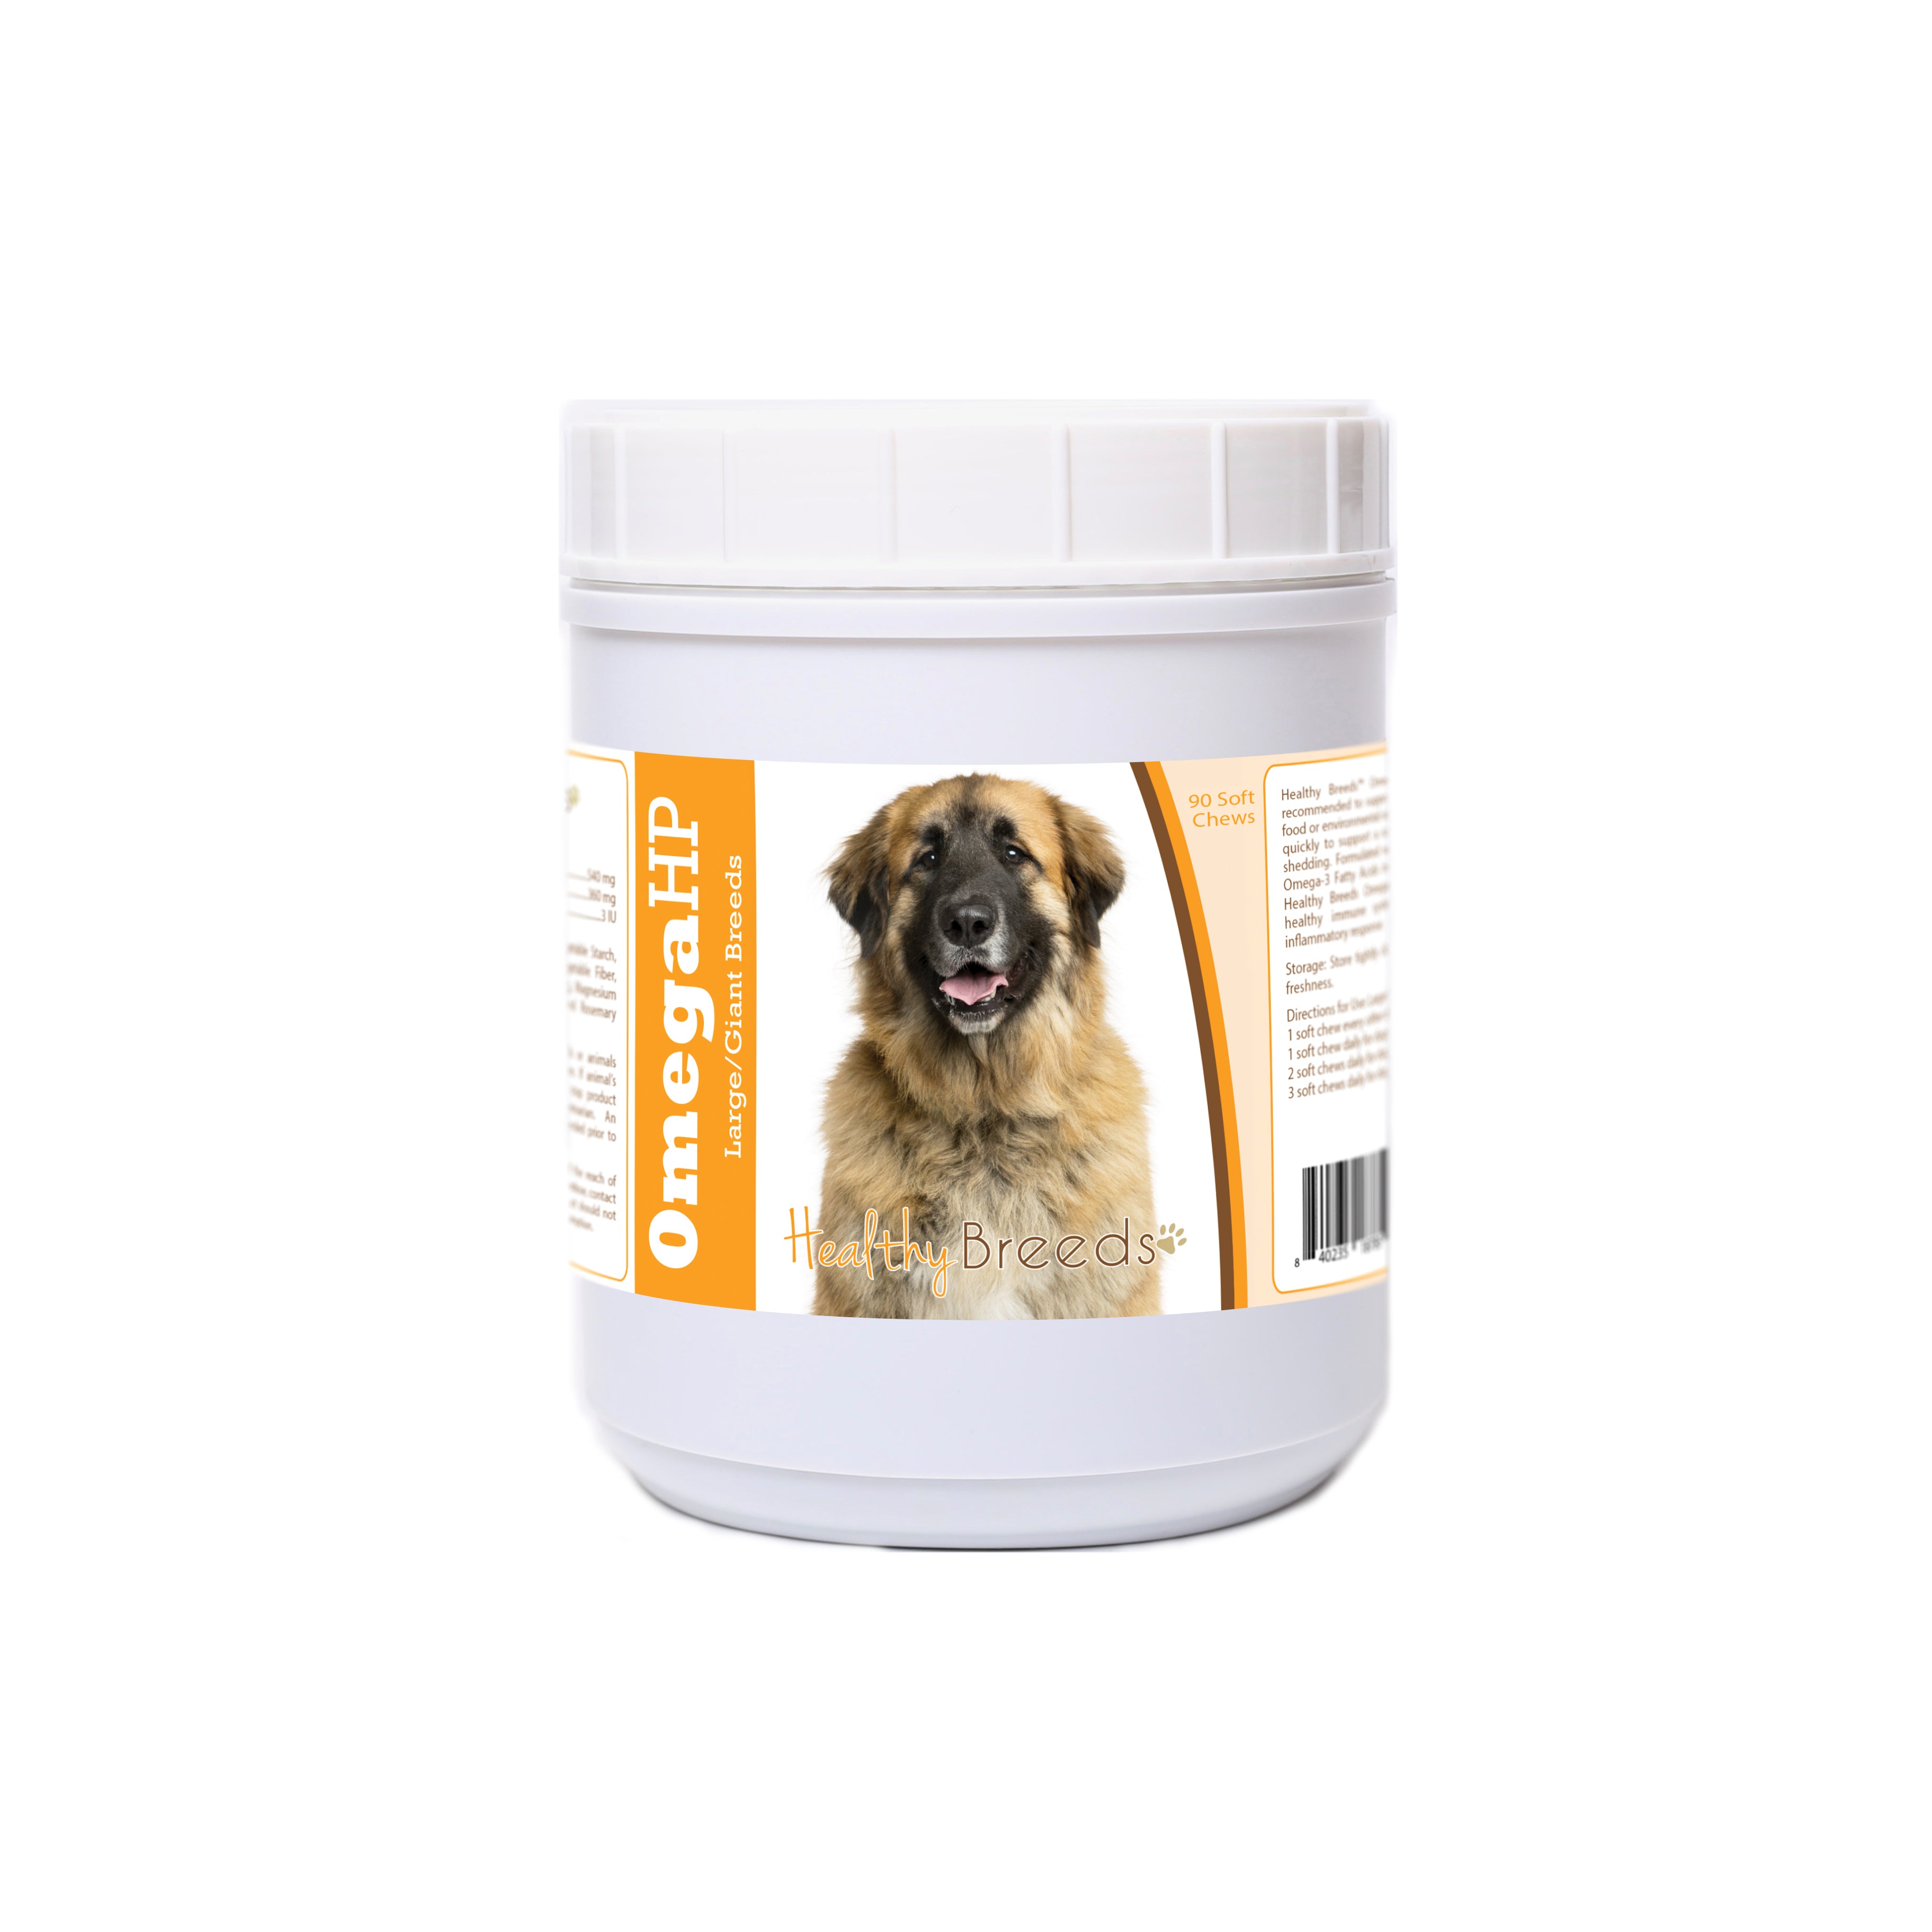 Leonberger Omega HP Fatty Acid Skin and Coat Support Soft Chews 90 Count